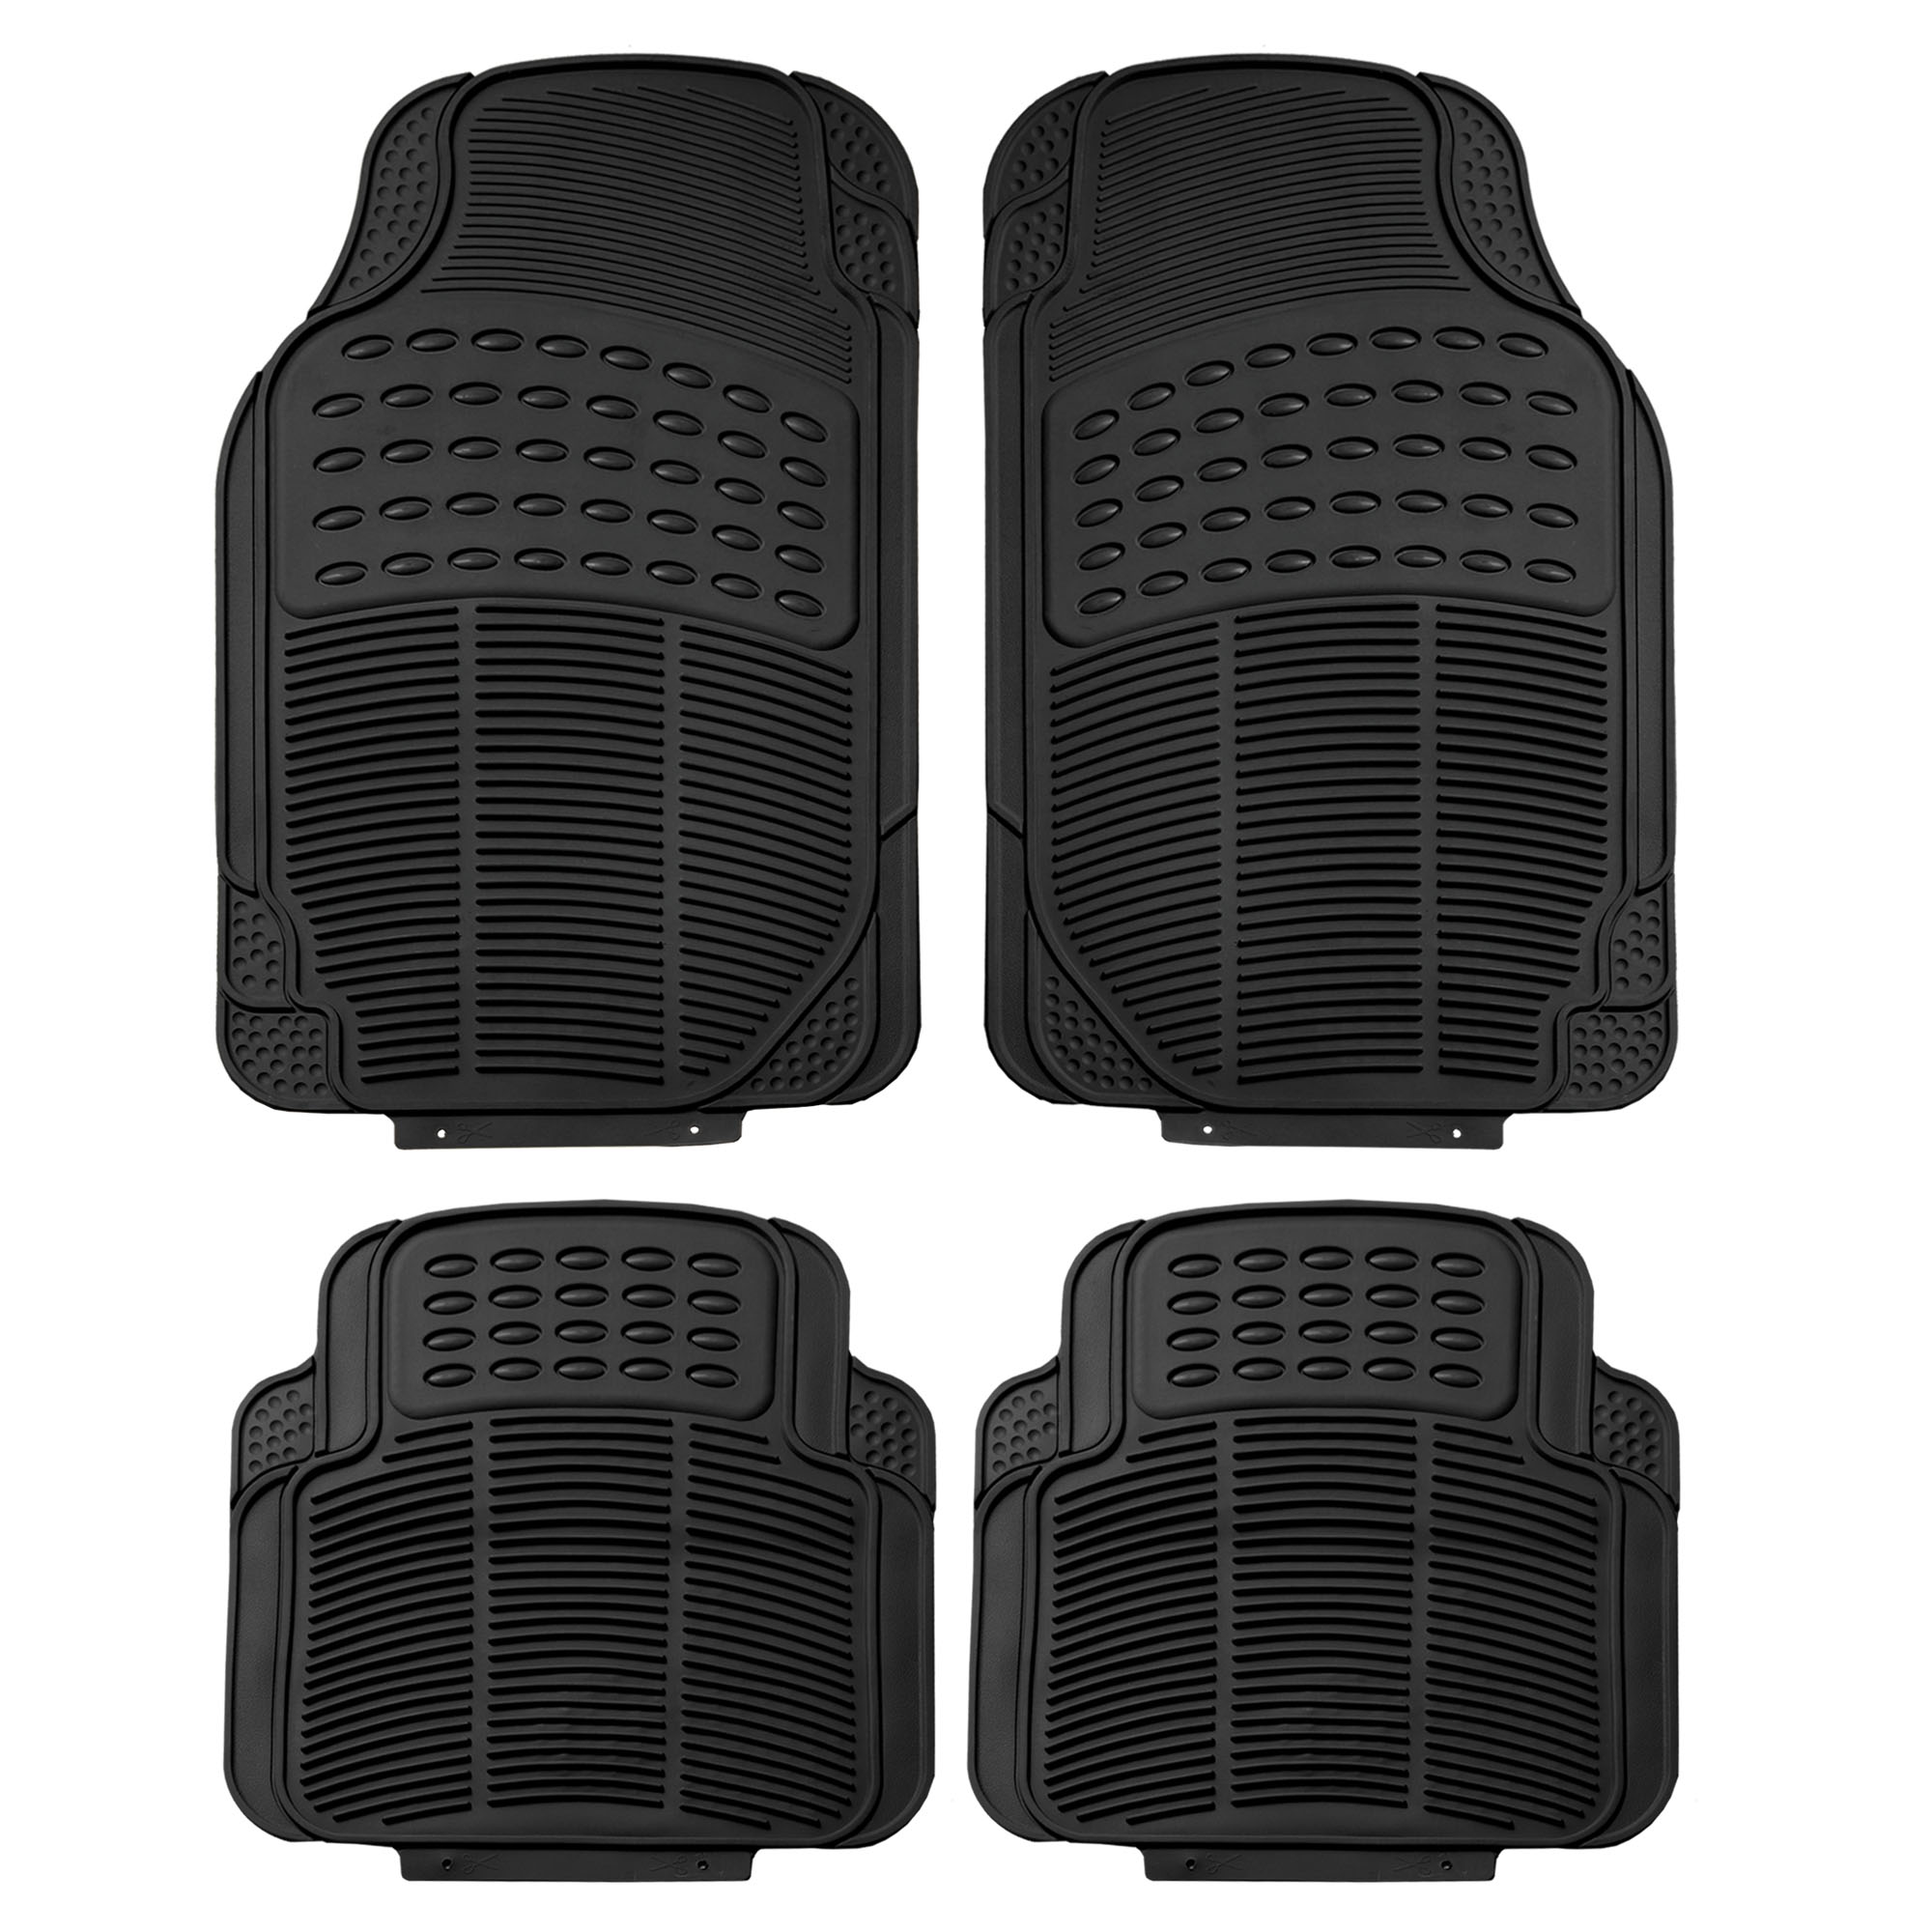 FH Group Universal Fit Rubber Floor Mats for Cars, Trimmable Mats for Most SUV Truck Full Set Black F11305BLACK - image 1 of 7